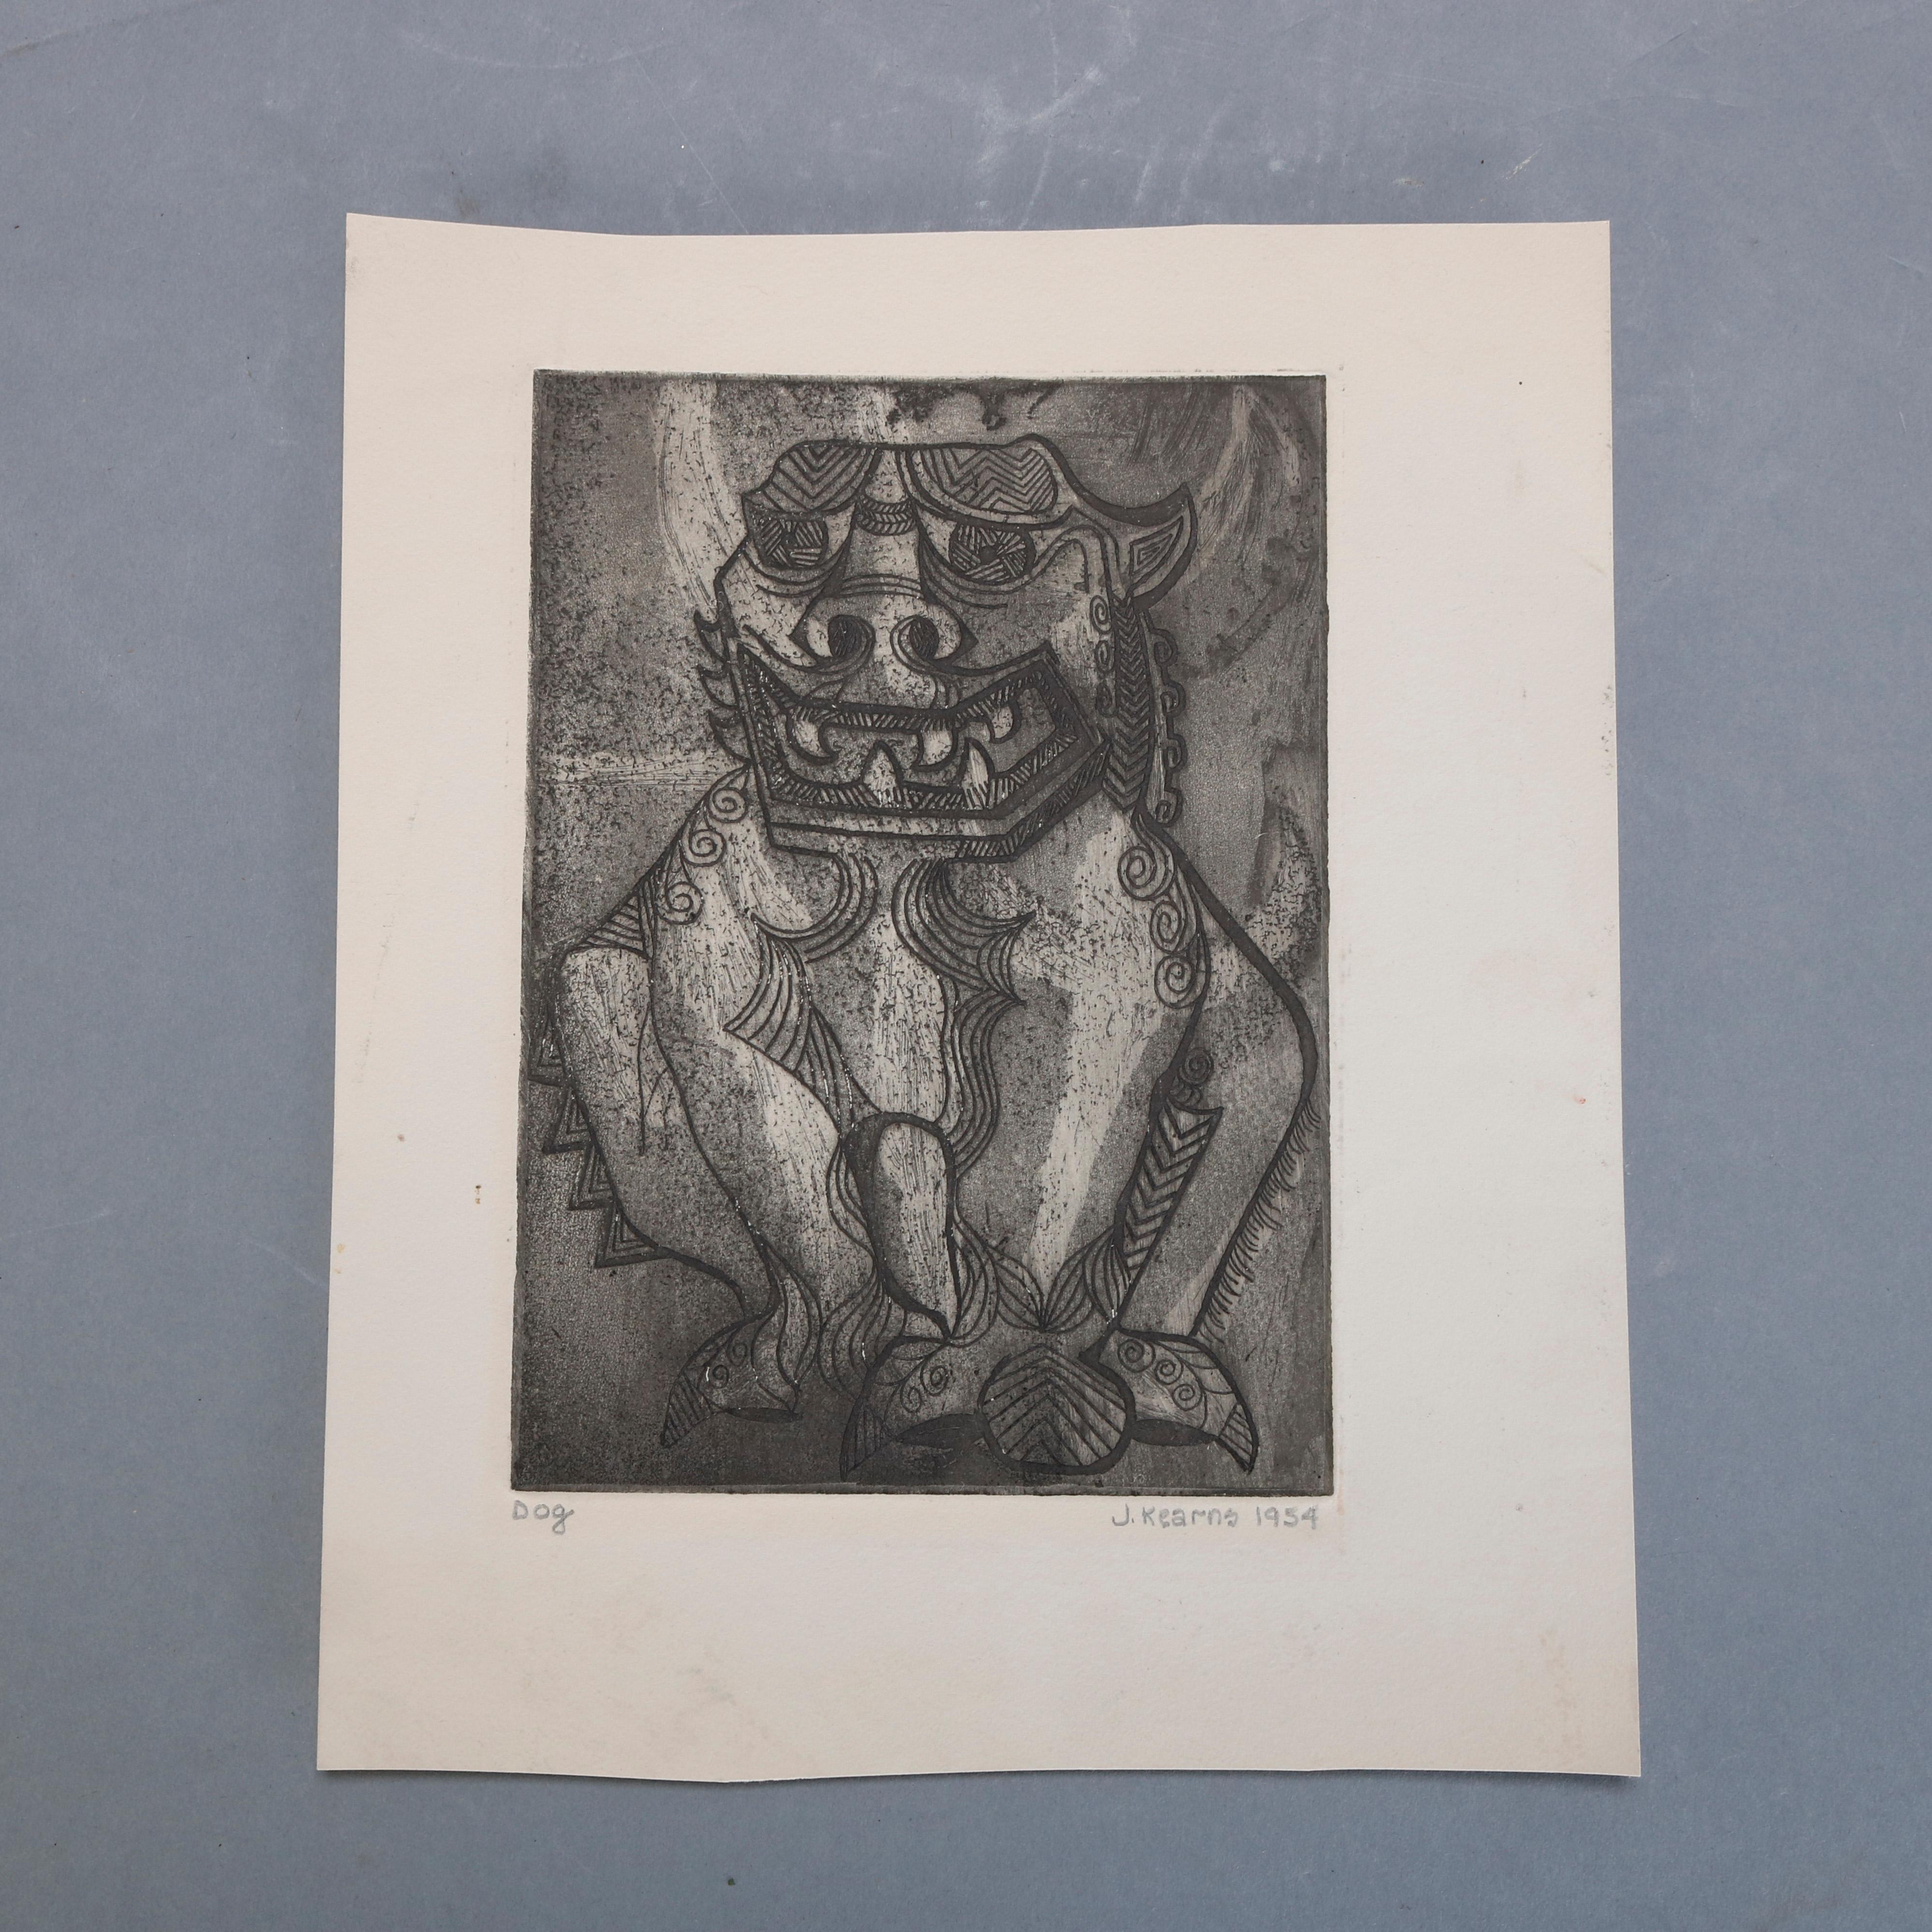 A collection of 4 James Joseph Kearns Expressionist lithographs depict figures in various settings, circa 1954

Measures: Chinese dog: 9.5